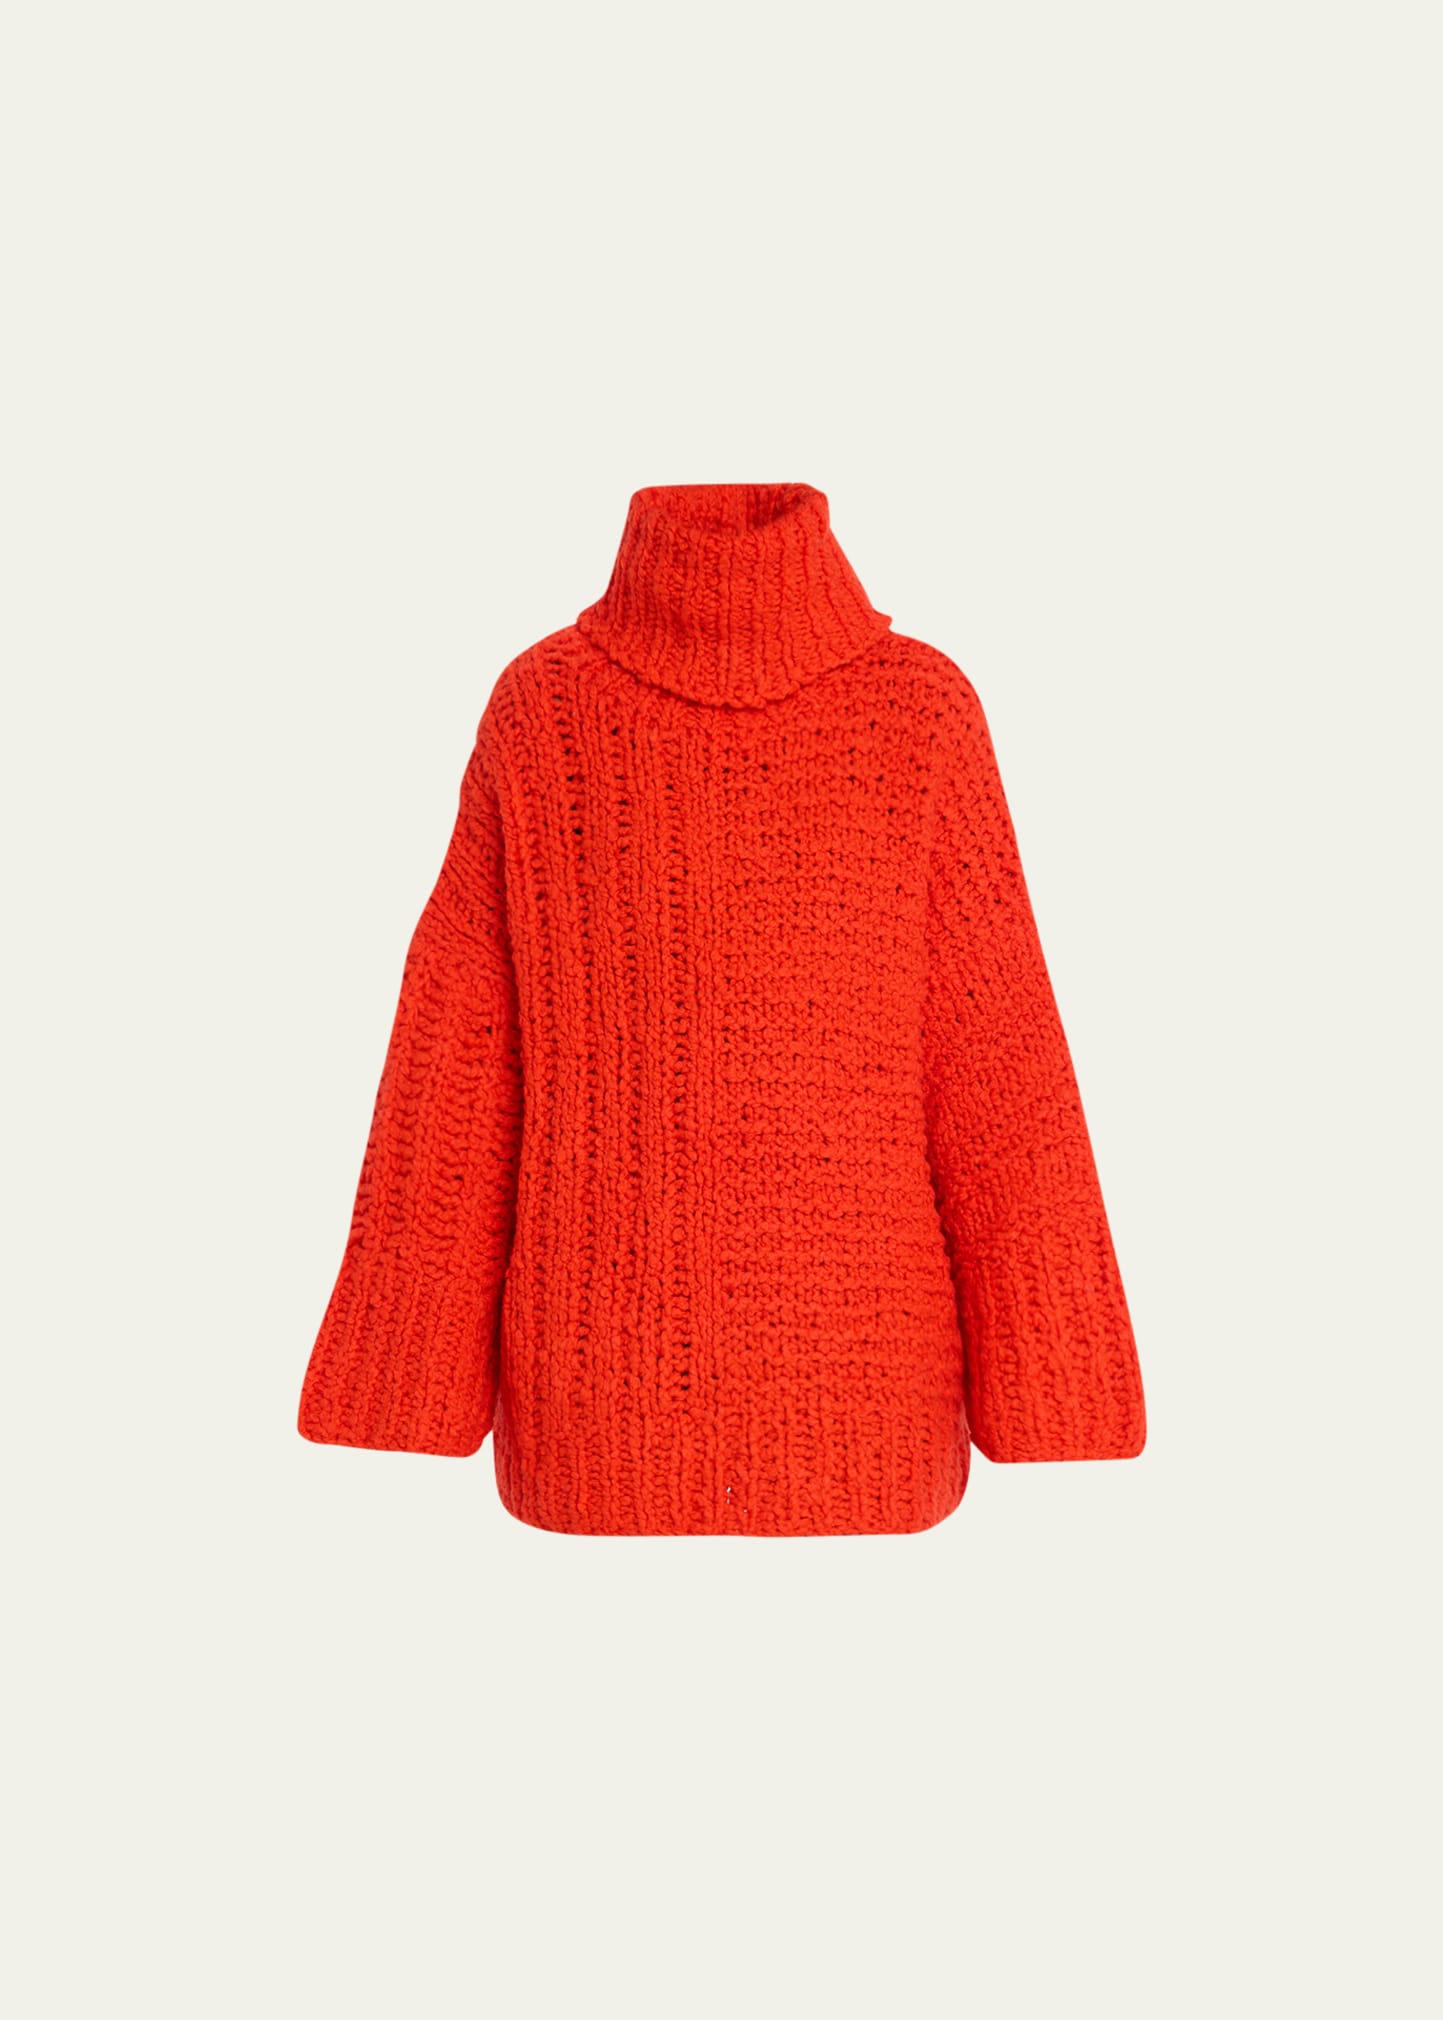 Giant Hand-Knit Turtleneck Sweater